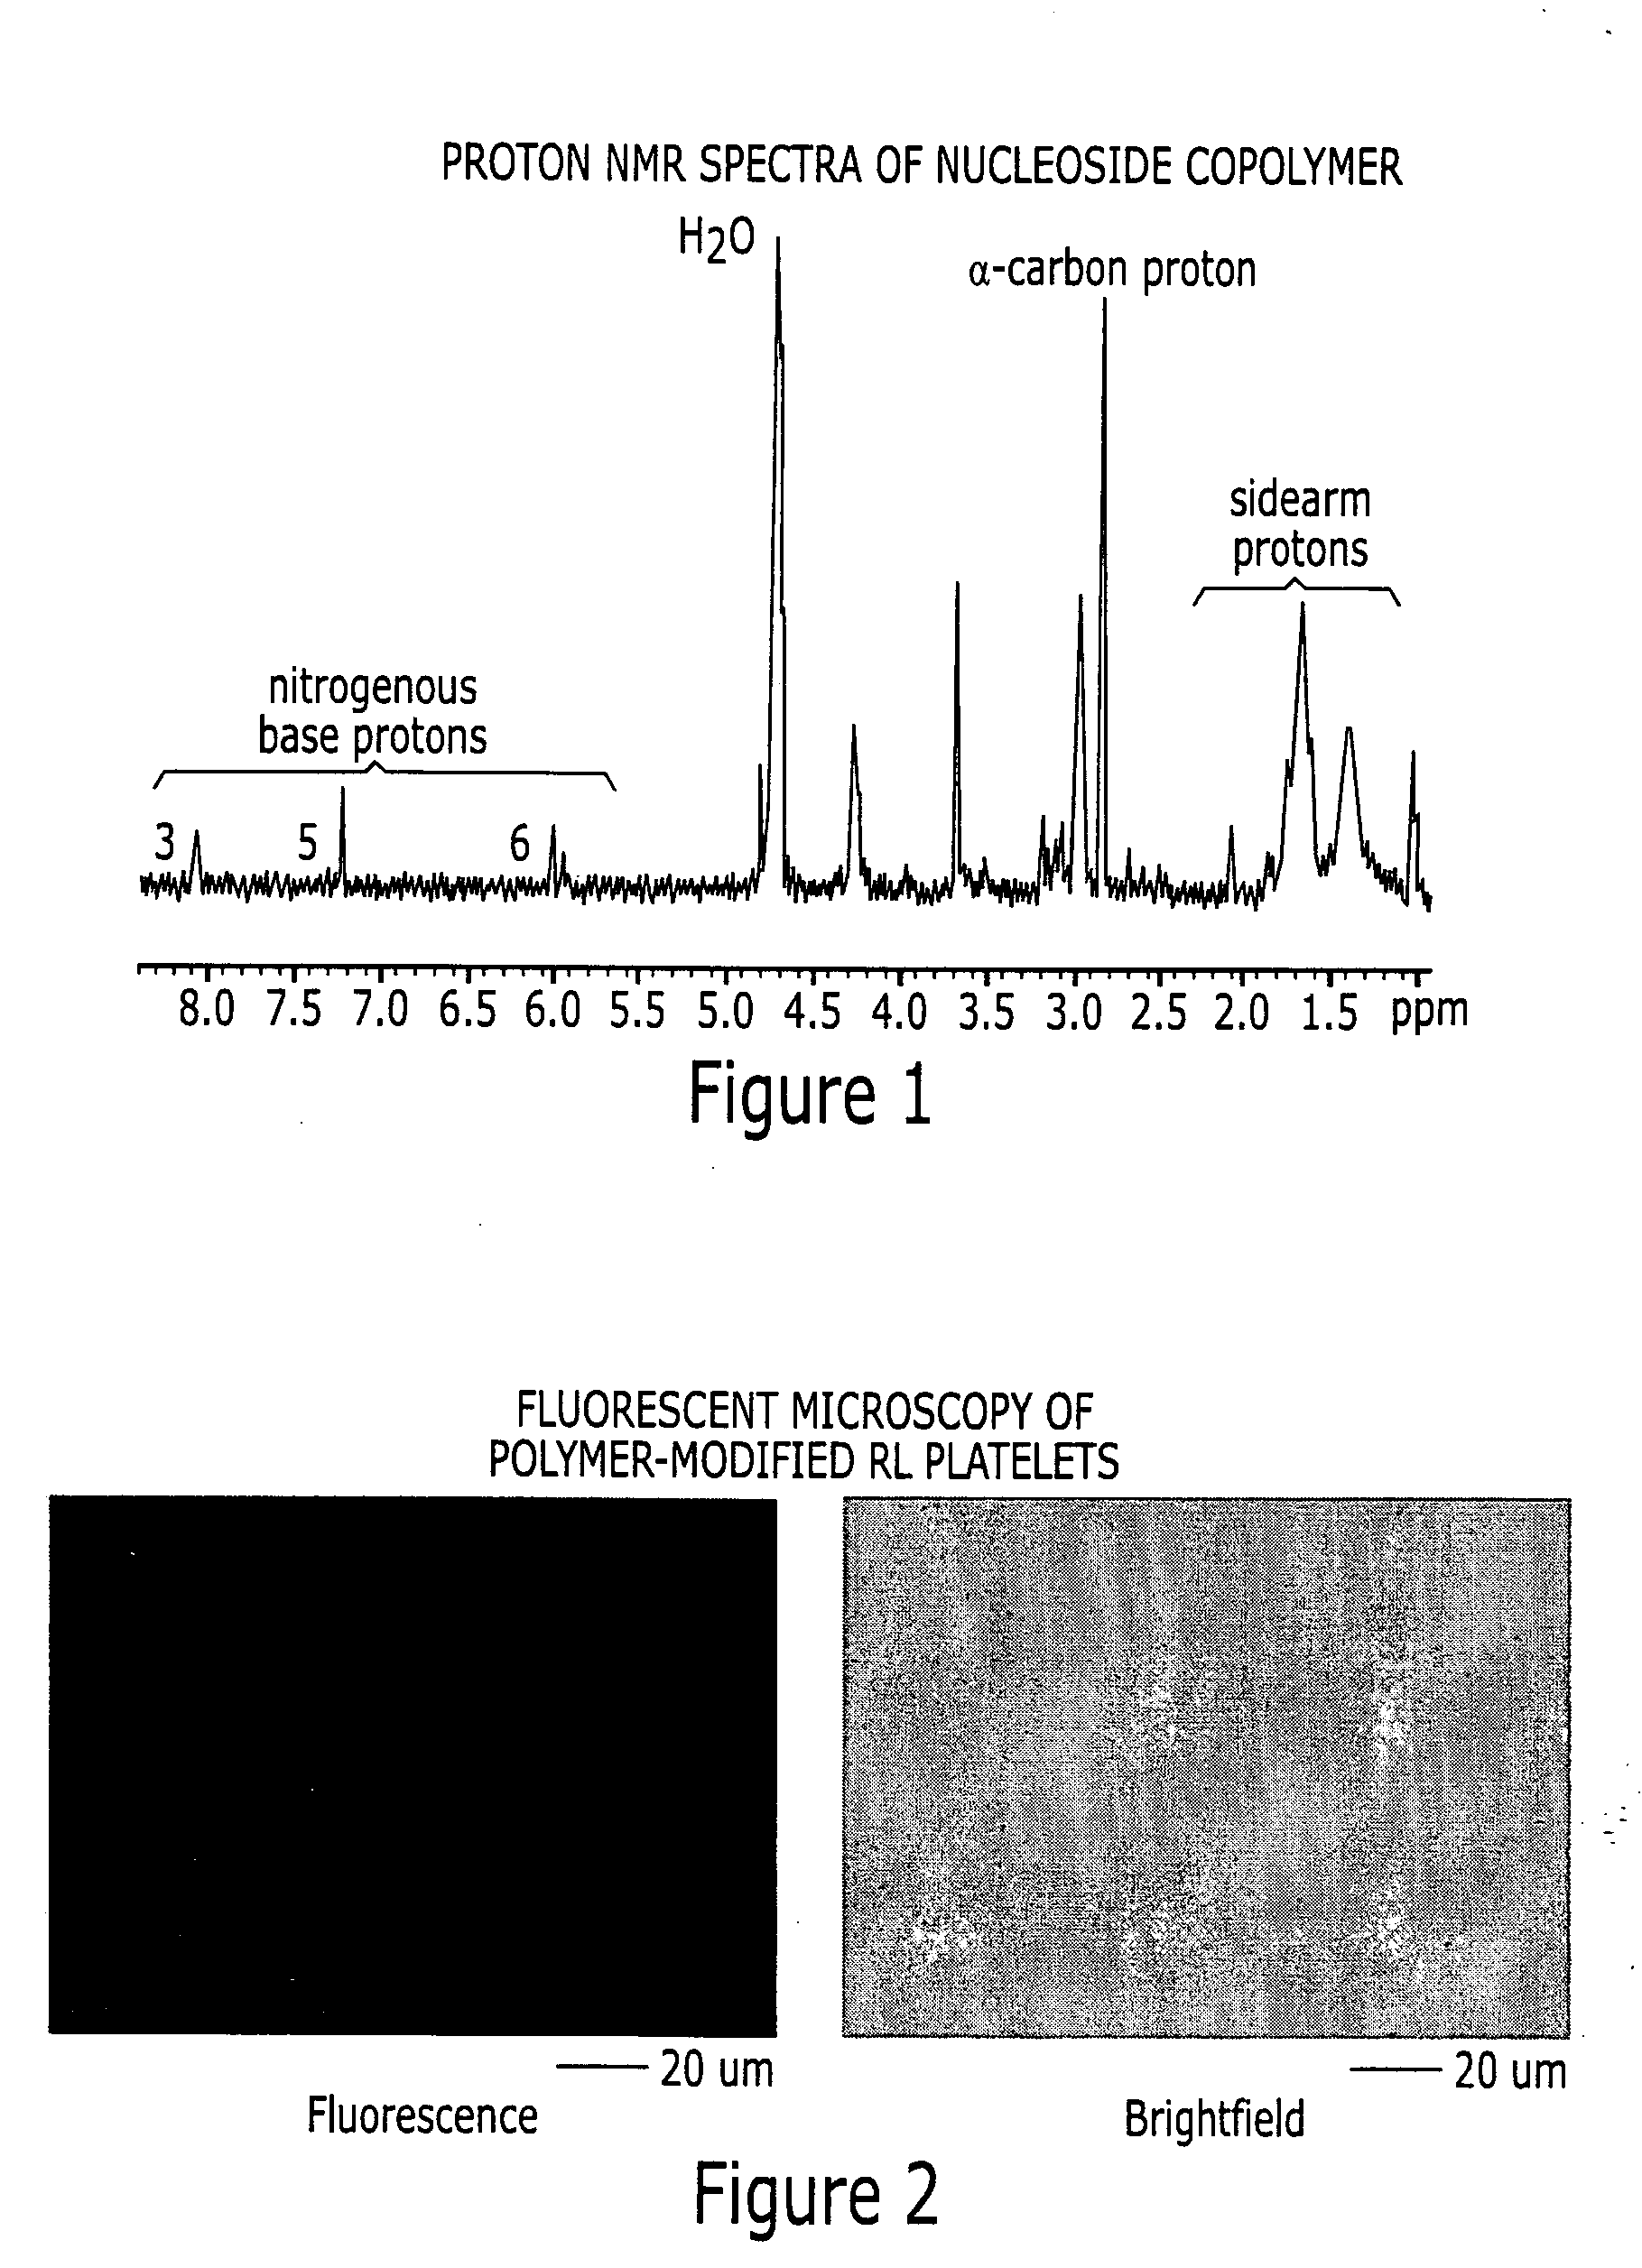 Delivery of compounds with rehydrated blood cells